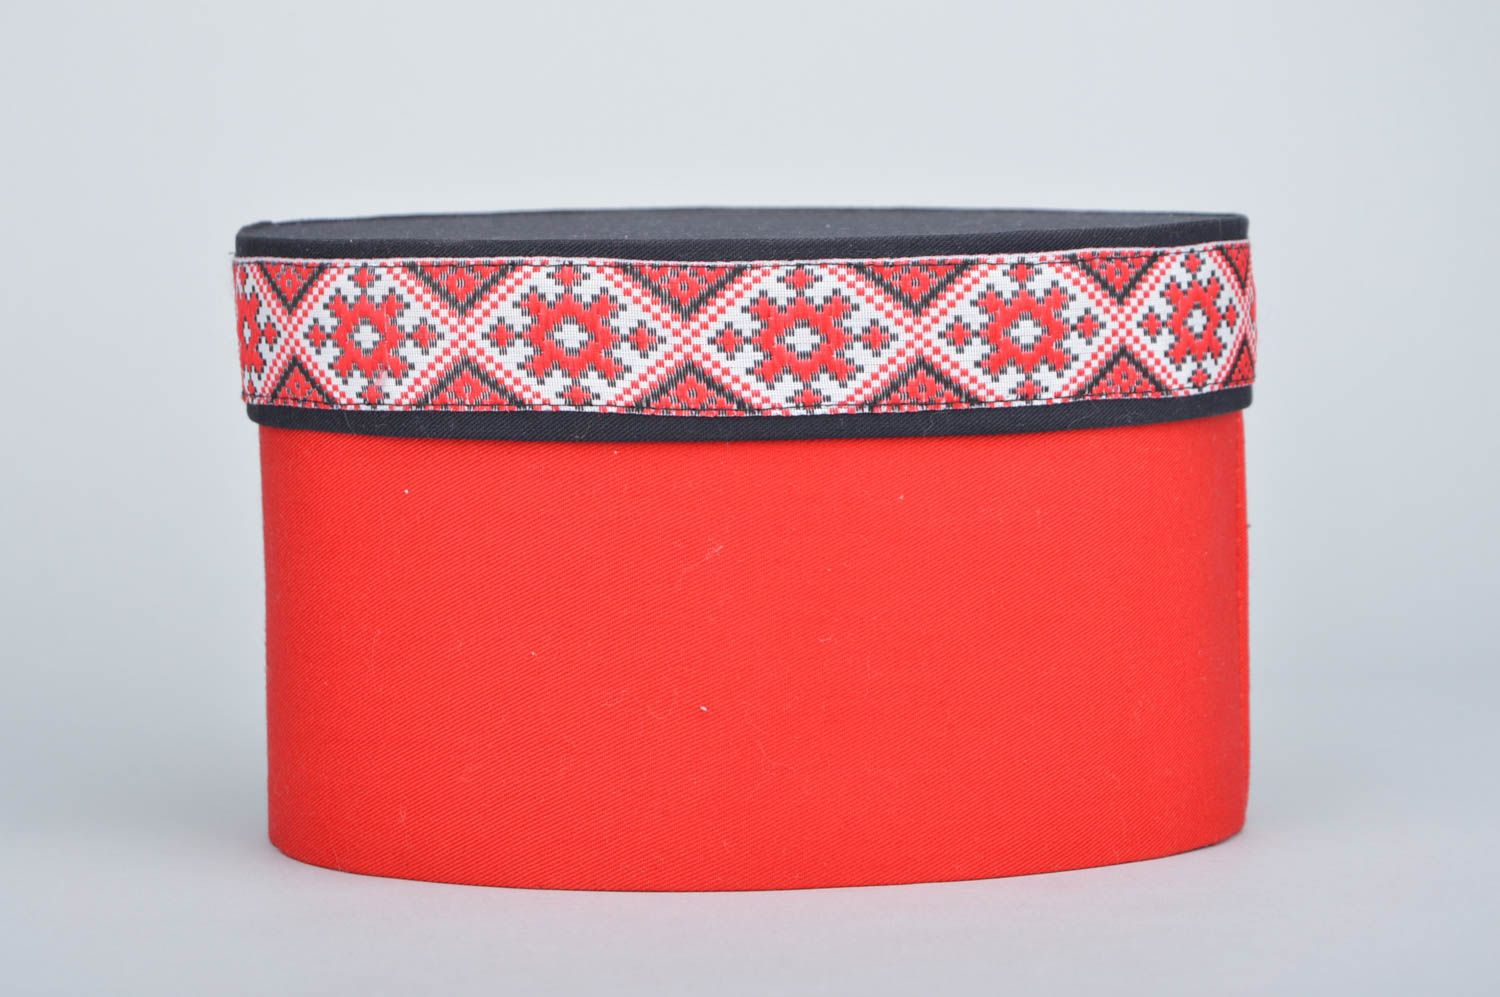 Handmade decorative oval carton box covered with red fabric with ethnic motifs photo 2